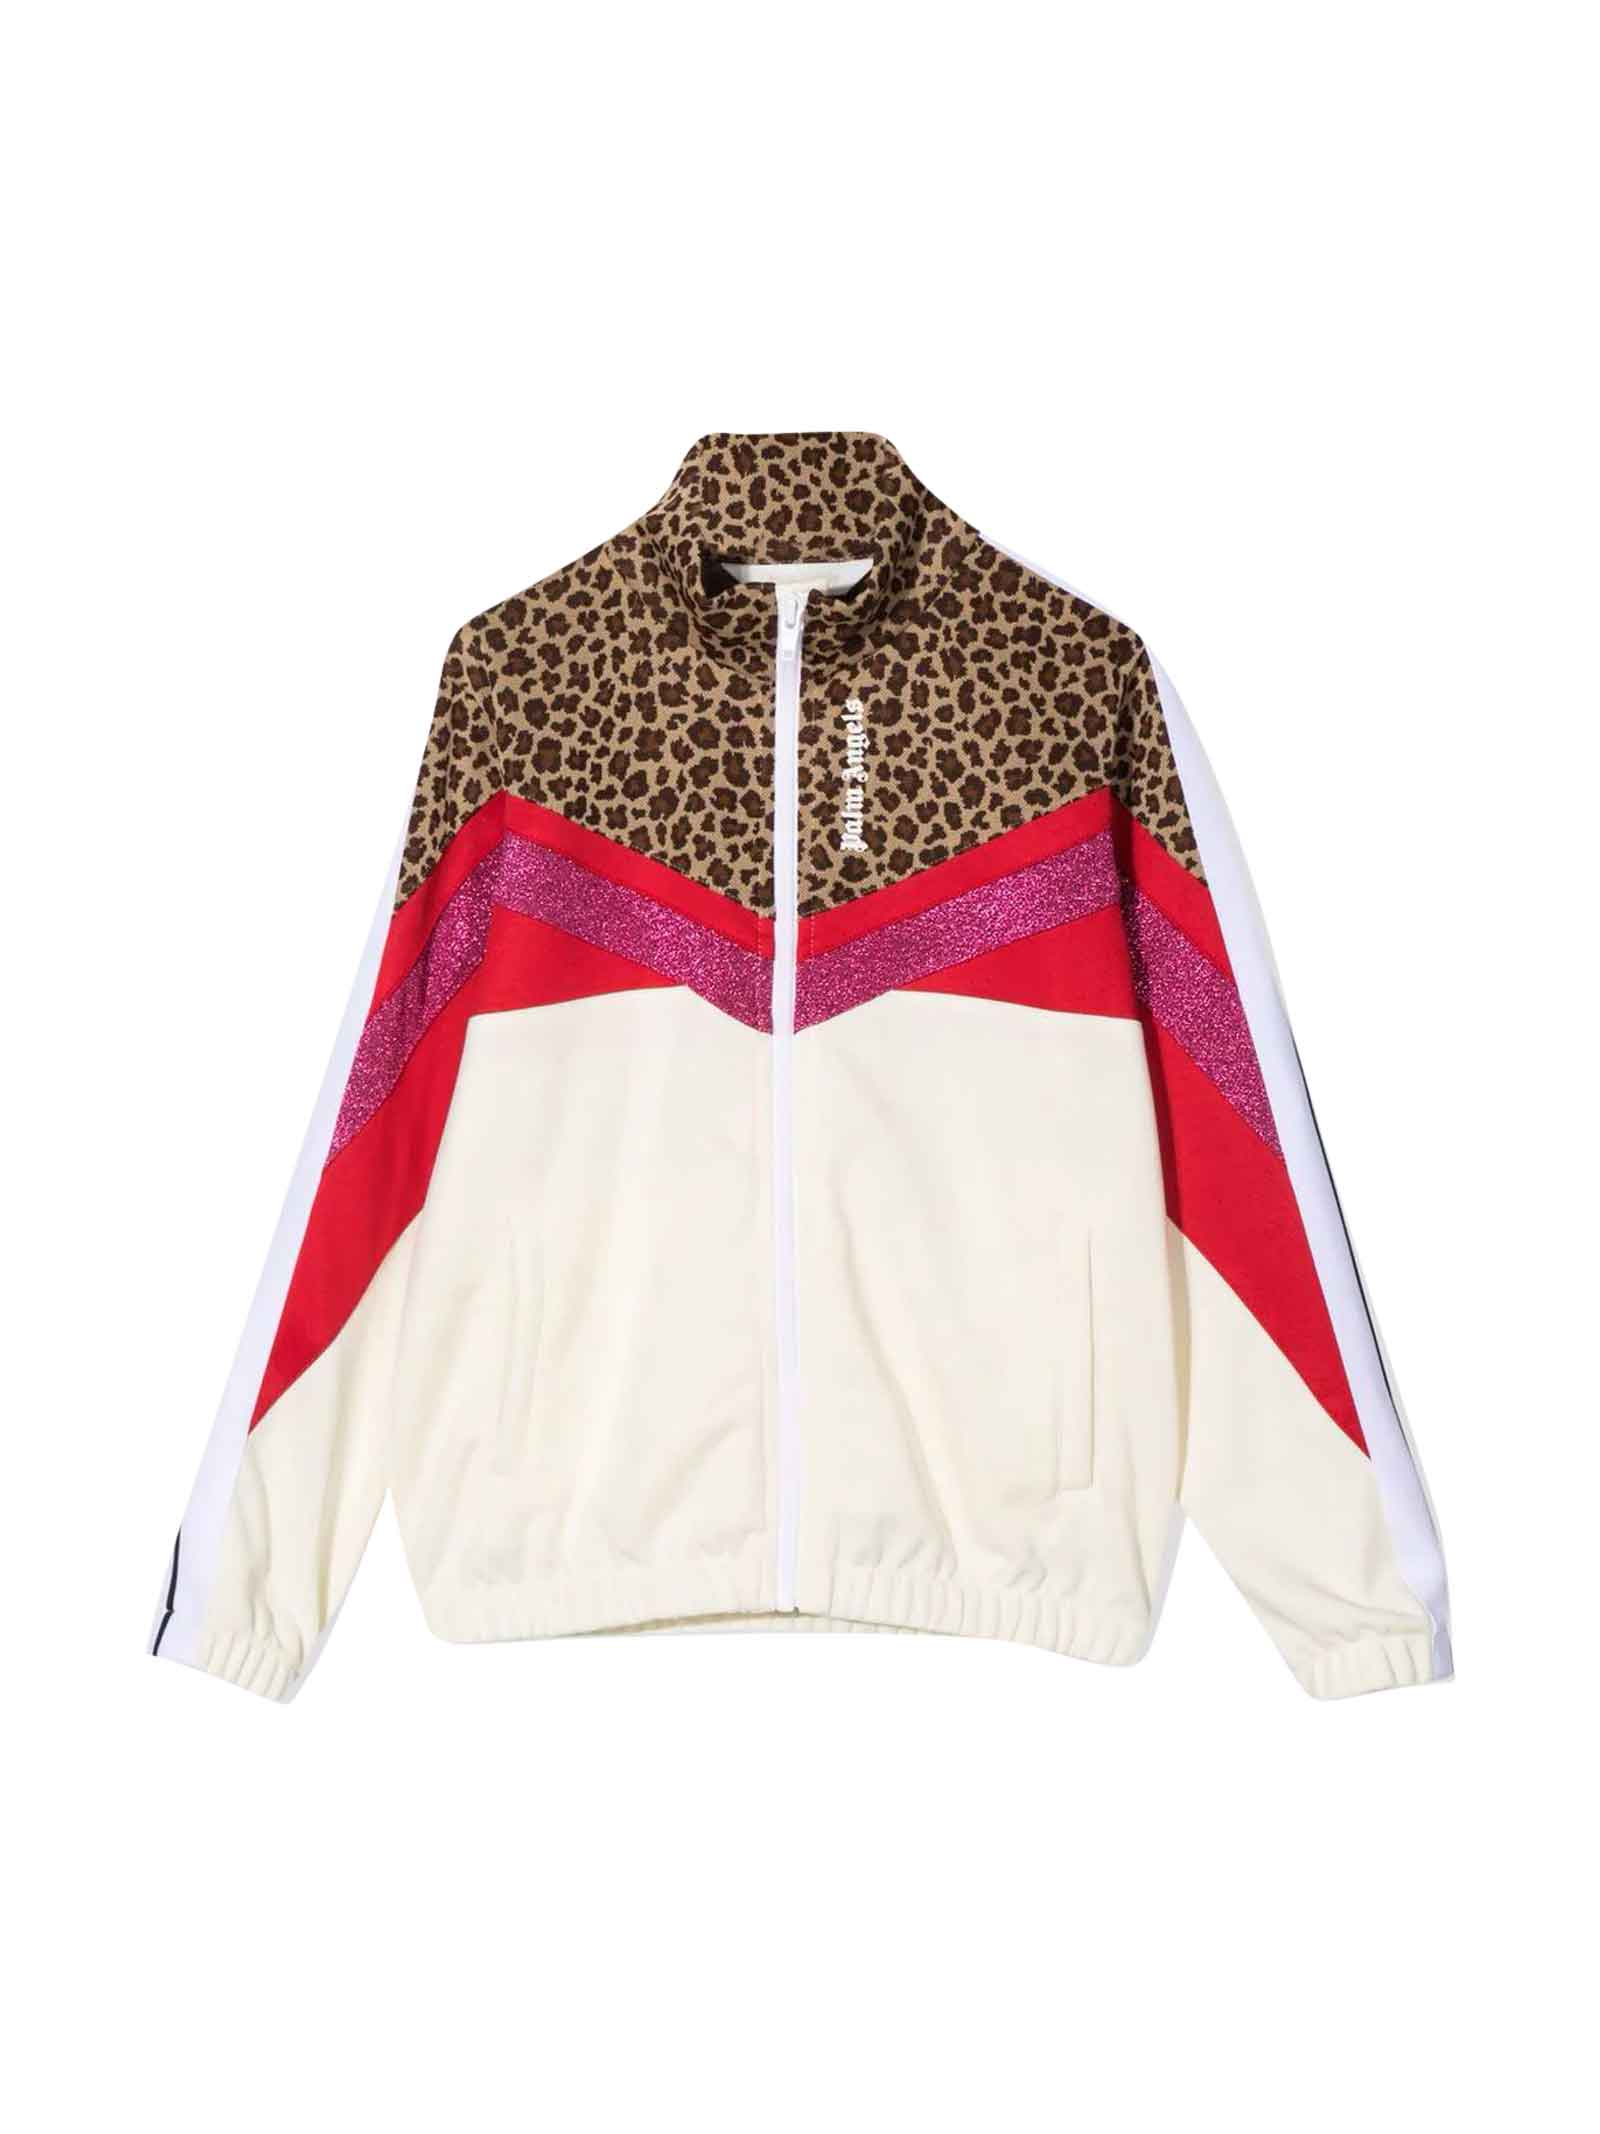 Palm Angels Girl Jacket With Sectional Design